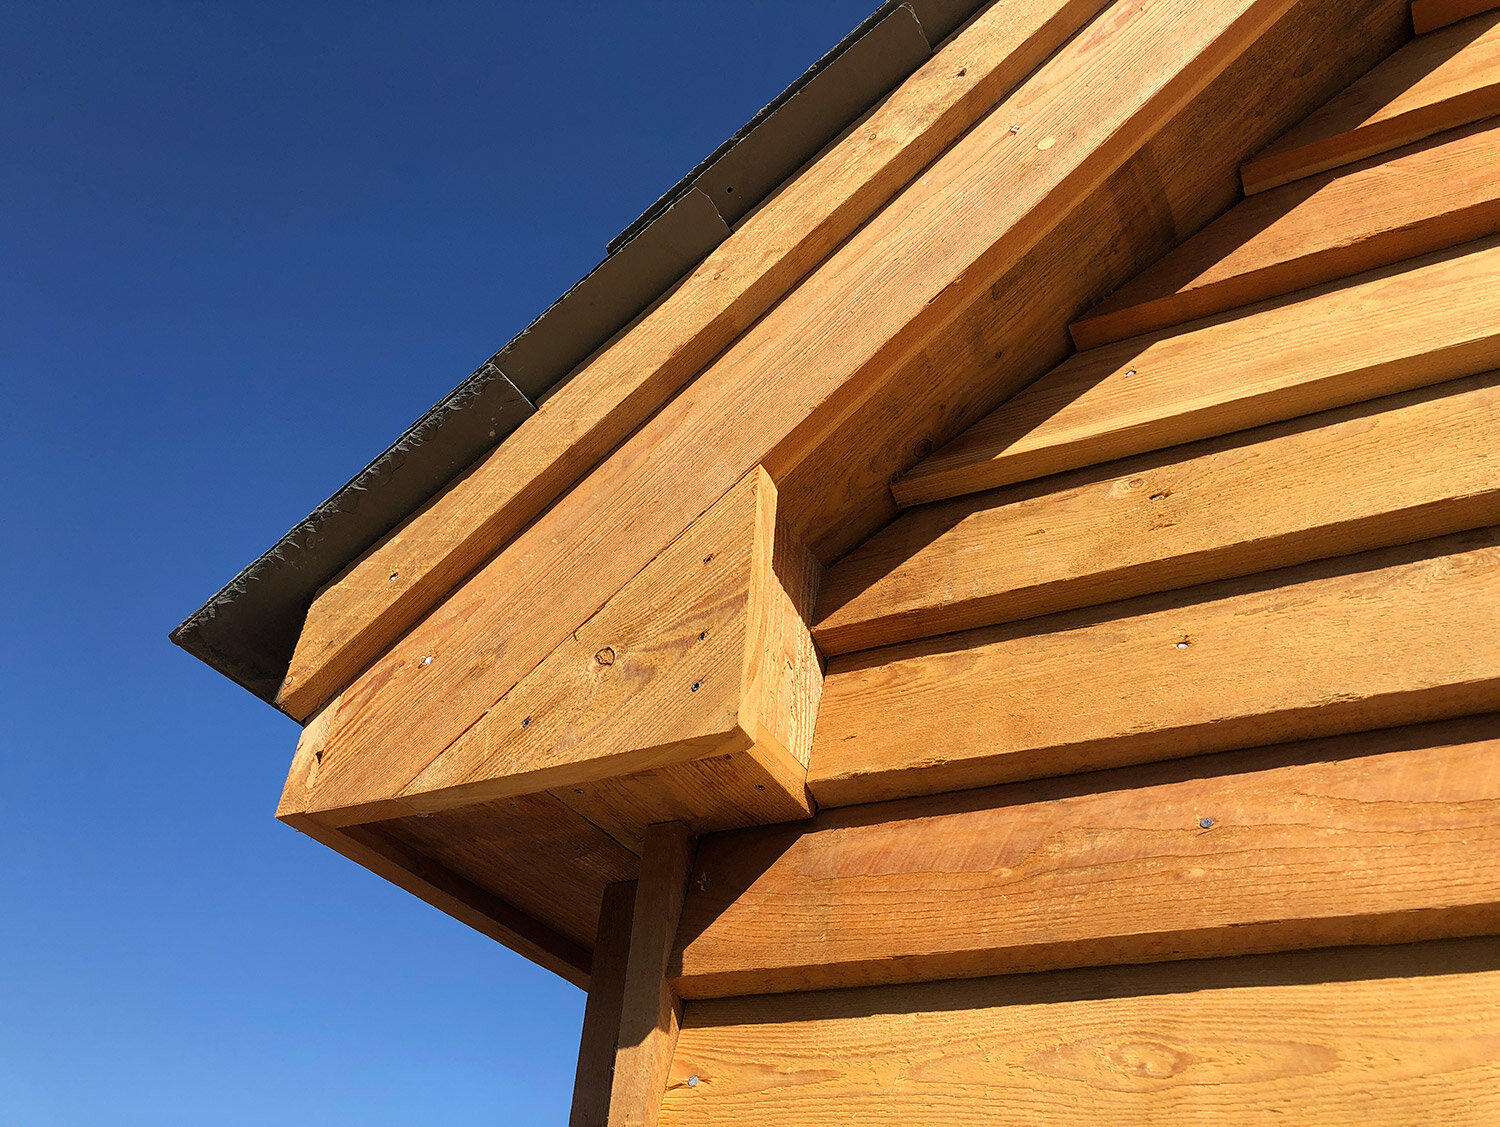 Detail of Larch cladding and eaves of timber studio